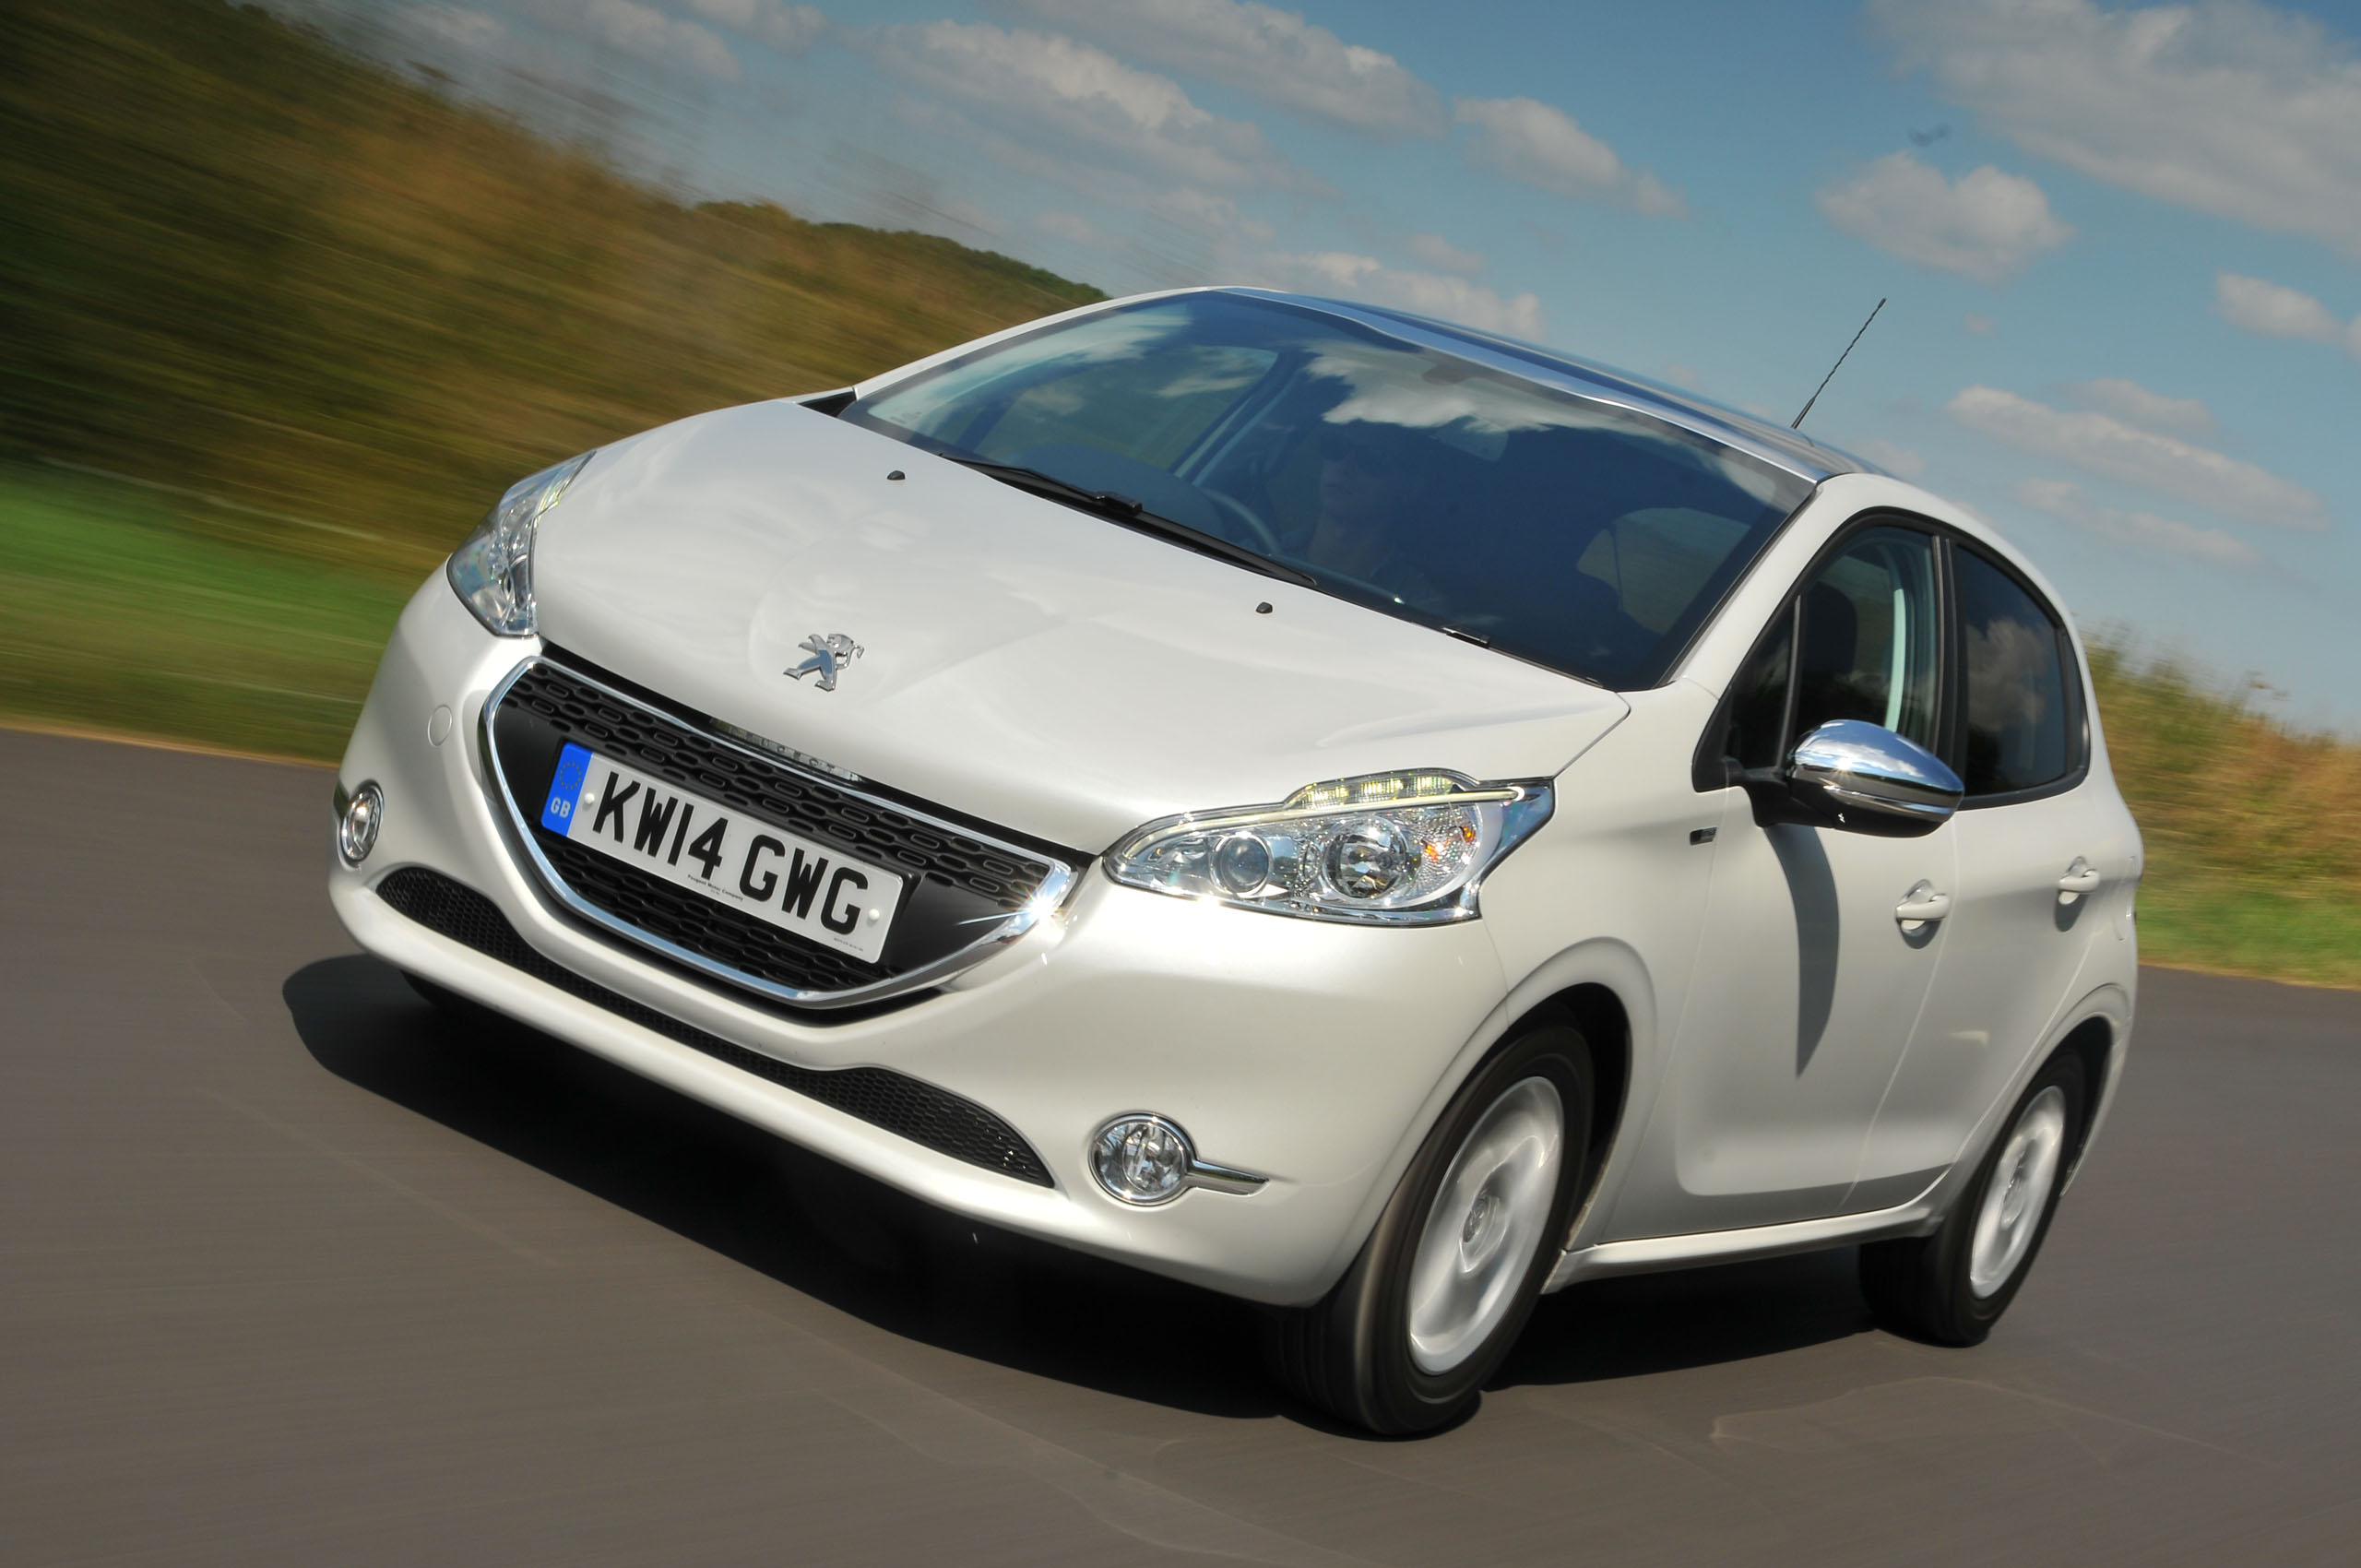 New Peugeot 208 in-depth review: the most stylish supermini on